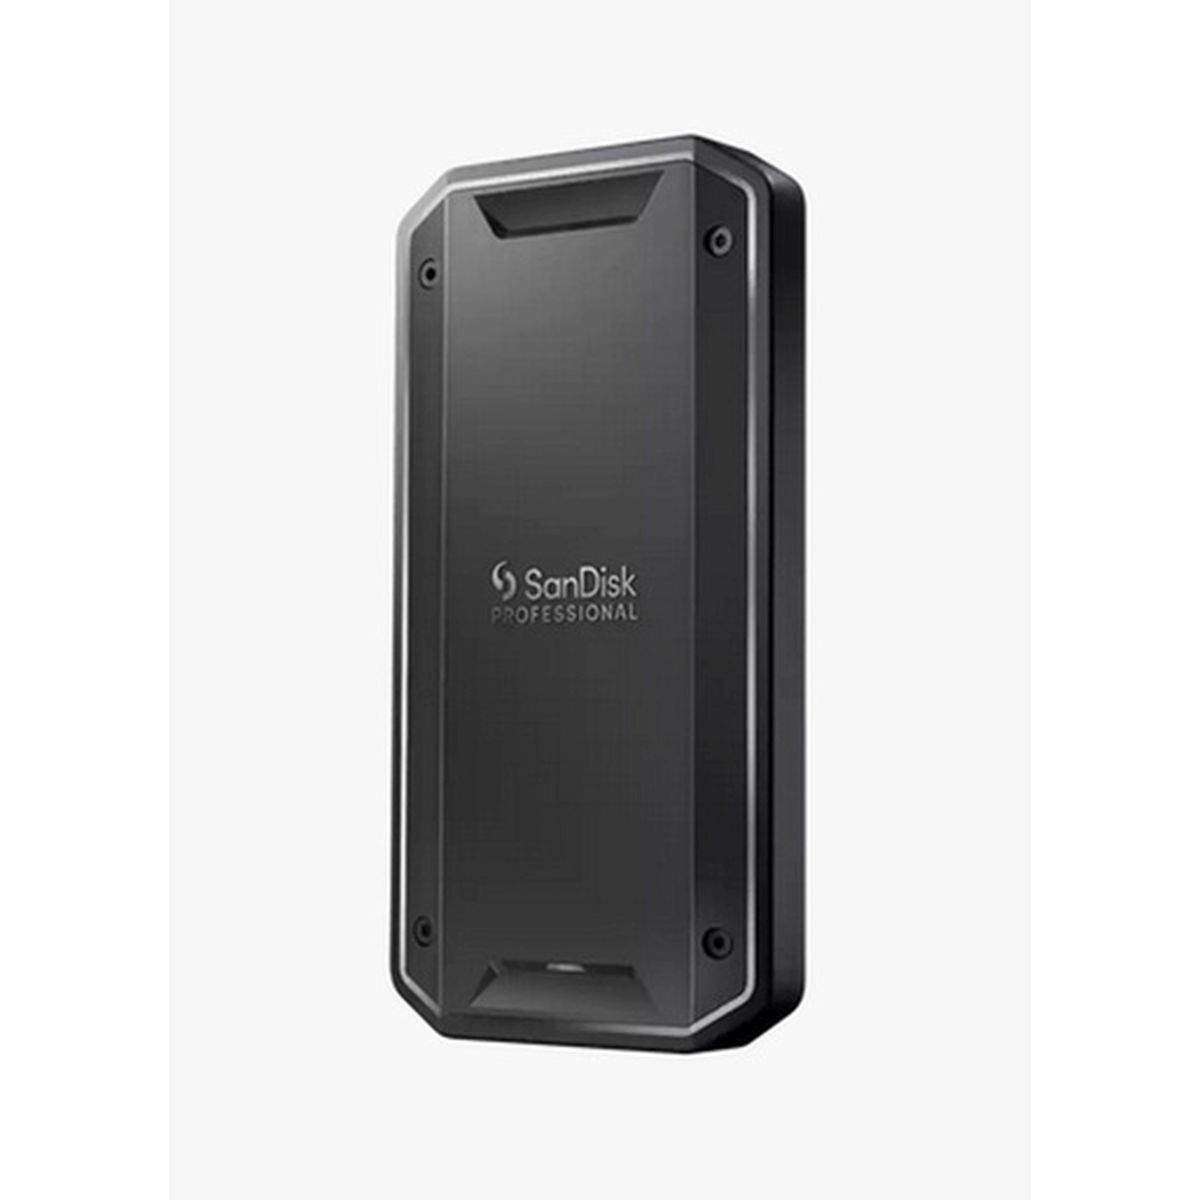 SanDisk Professional PRO-G40 SSD 2 TB mobile SSD